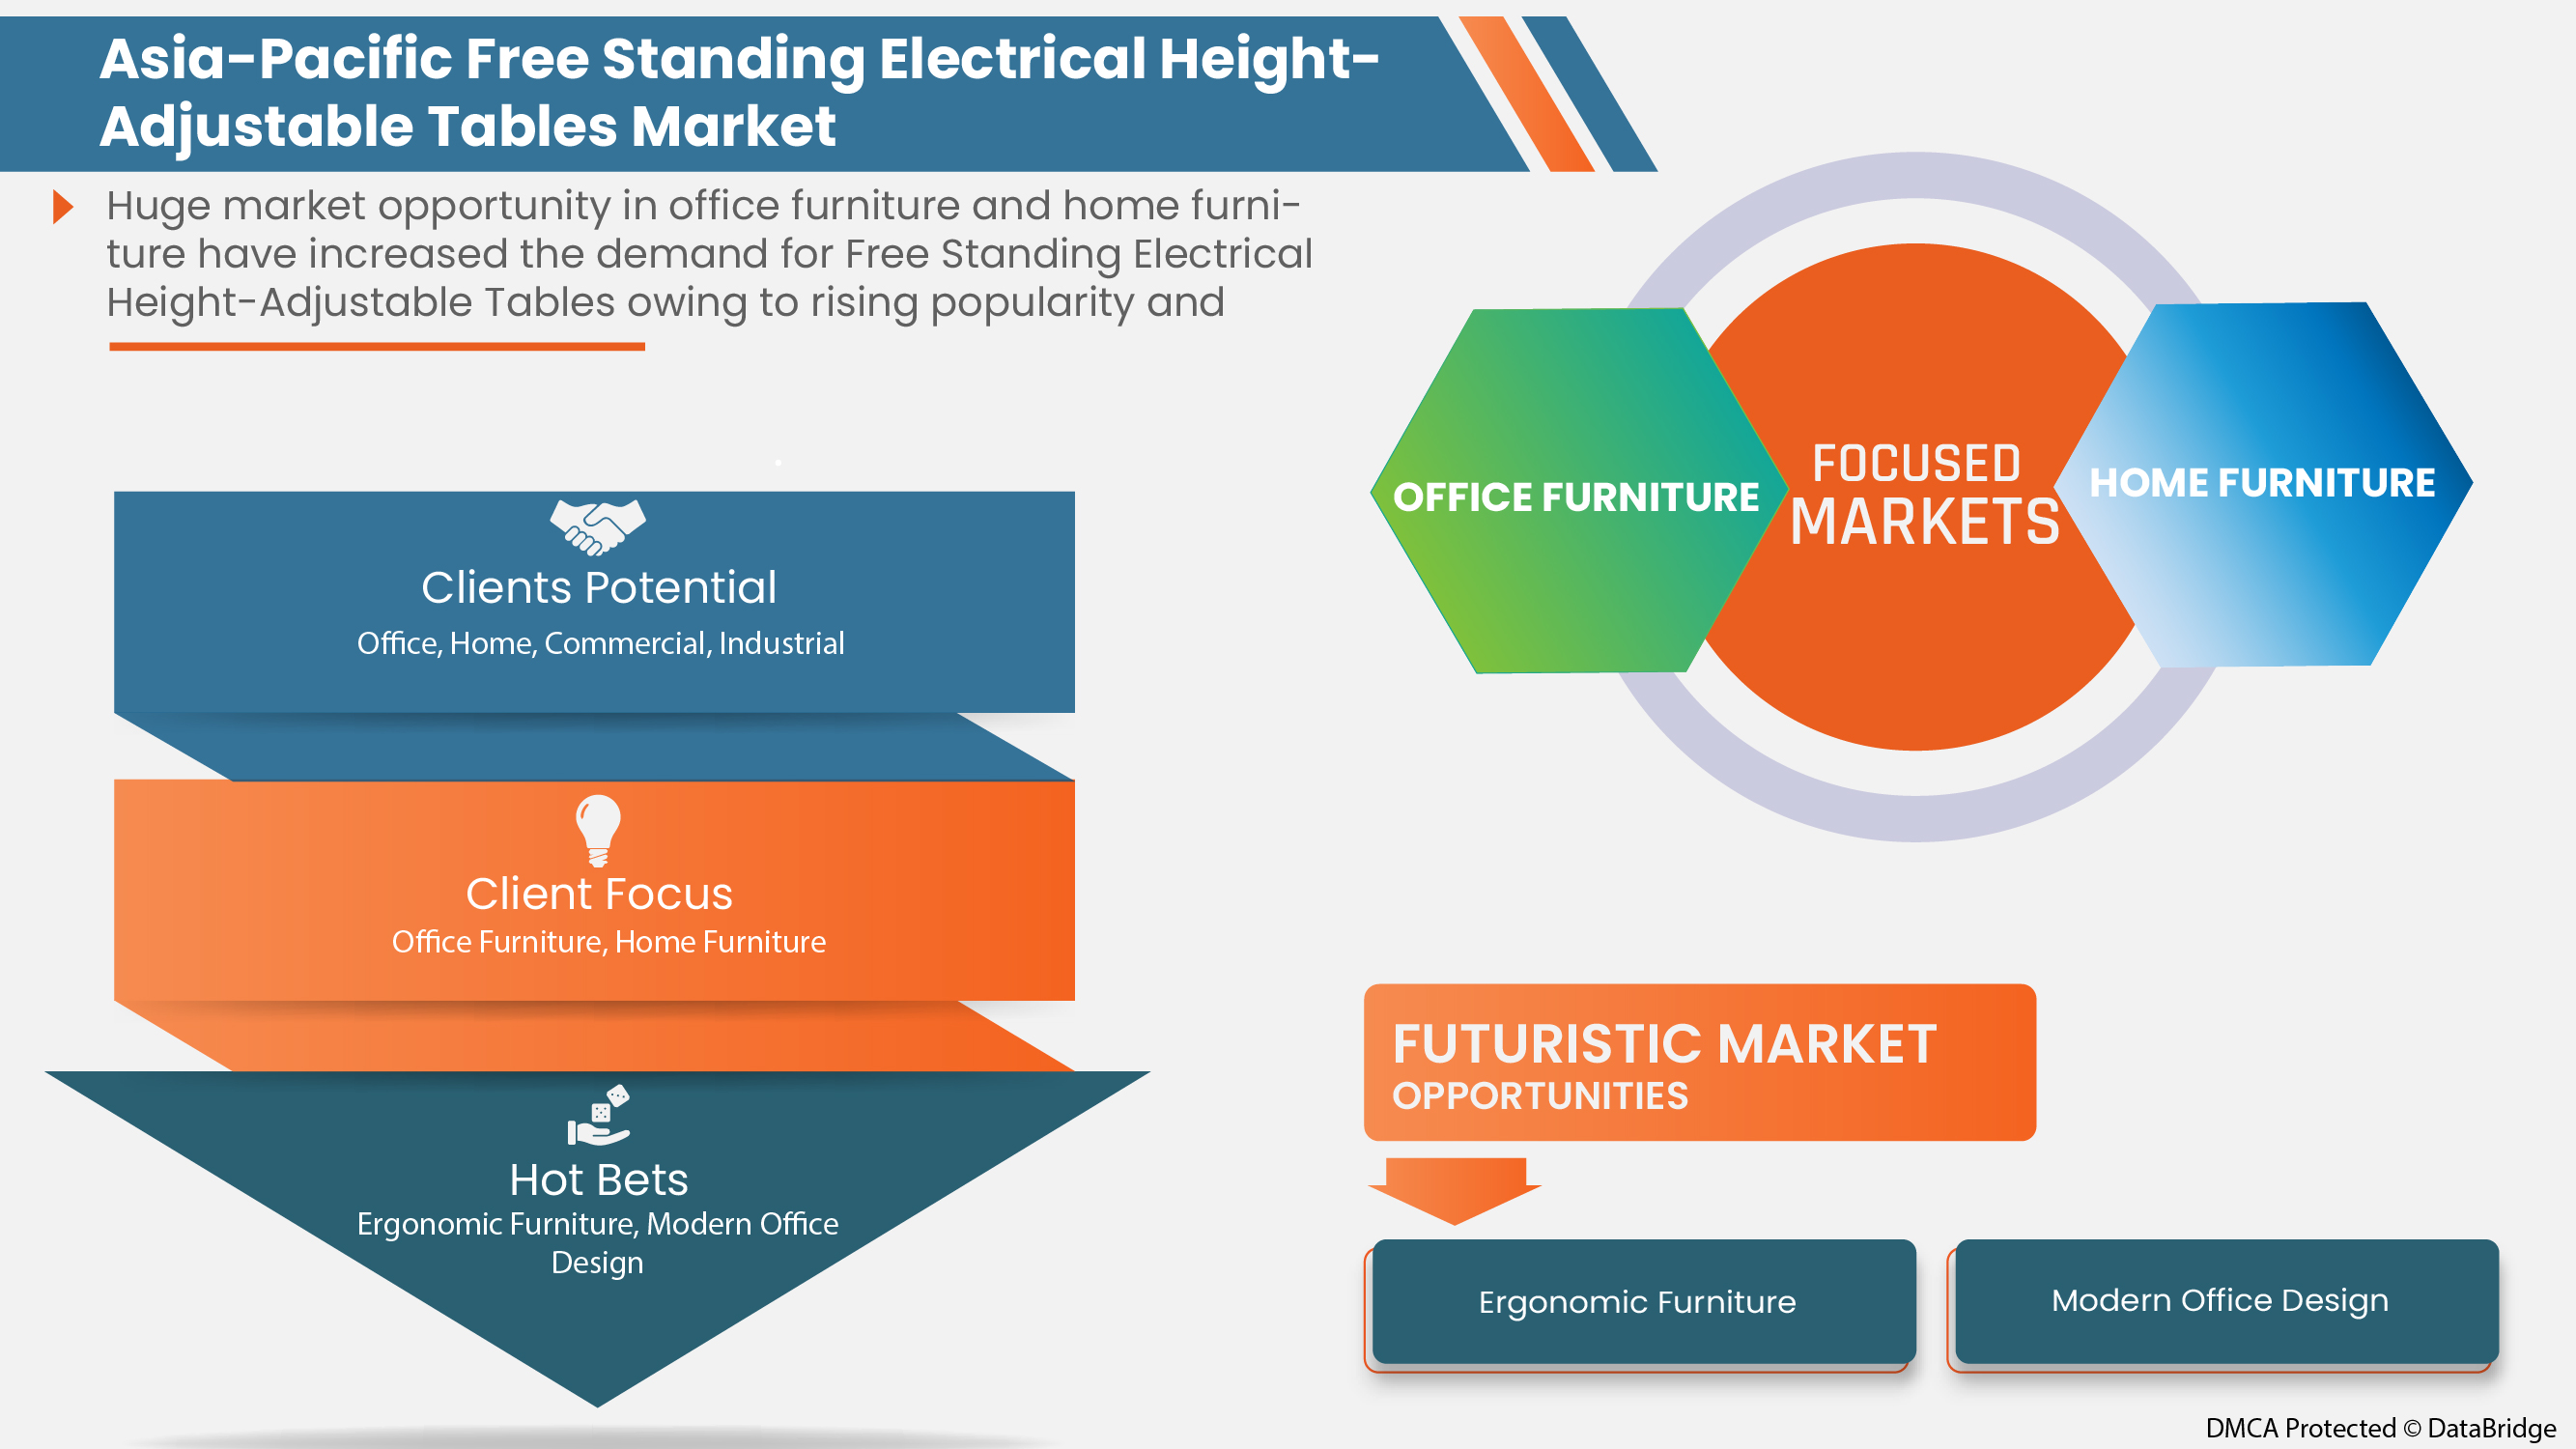 Asia-Pacific Free Standing Electrical Height-Adjustable Tables Market